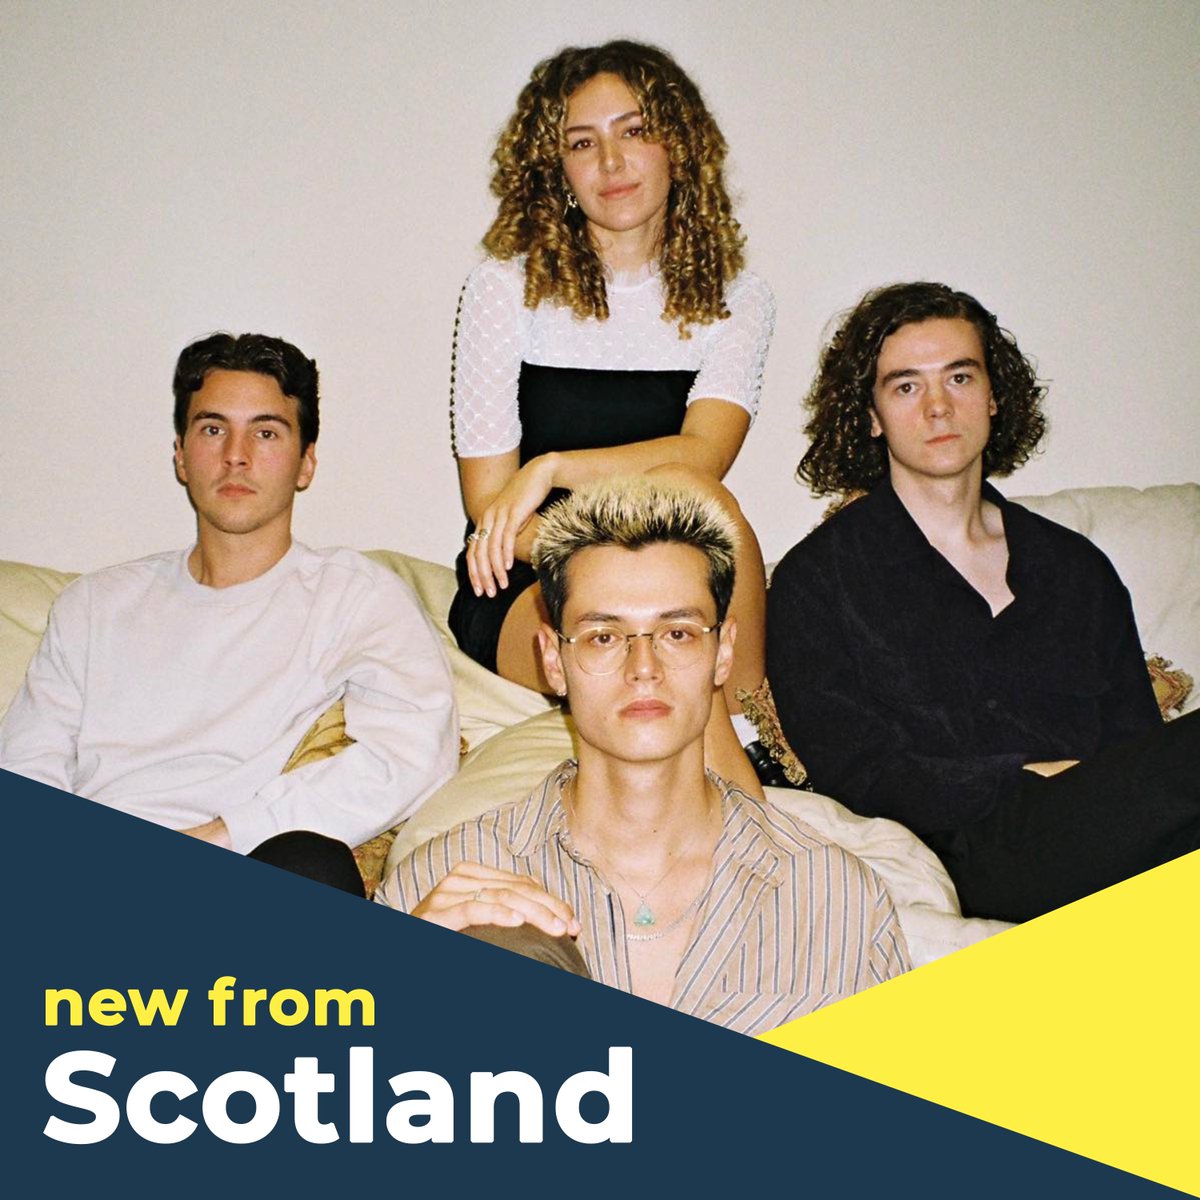 Happy Friday! Our New From Scotland playlist has just been updated with the latest releases from across Scotland! Check out new releases from @fright_years, @DoraLachaise, @CarlaJEaston, @wojtekbearband, @_savagemansion and more! Listen now 👉 wide.ink/NewScot